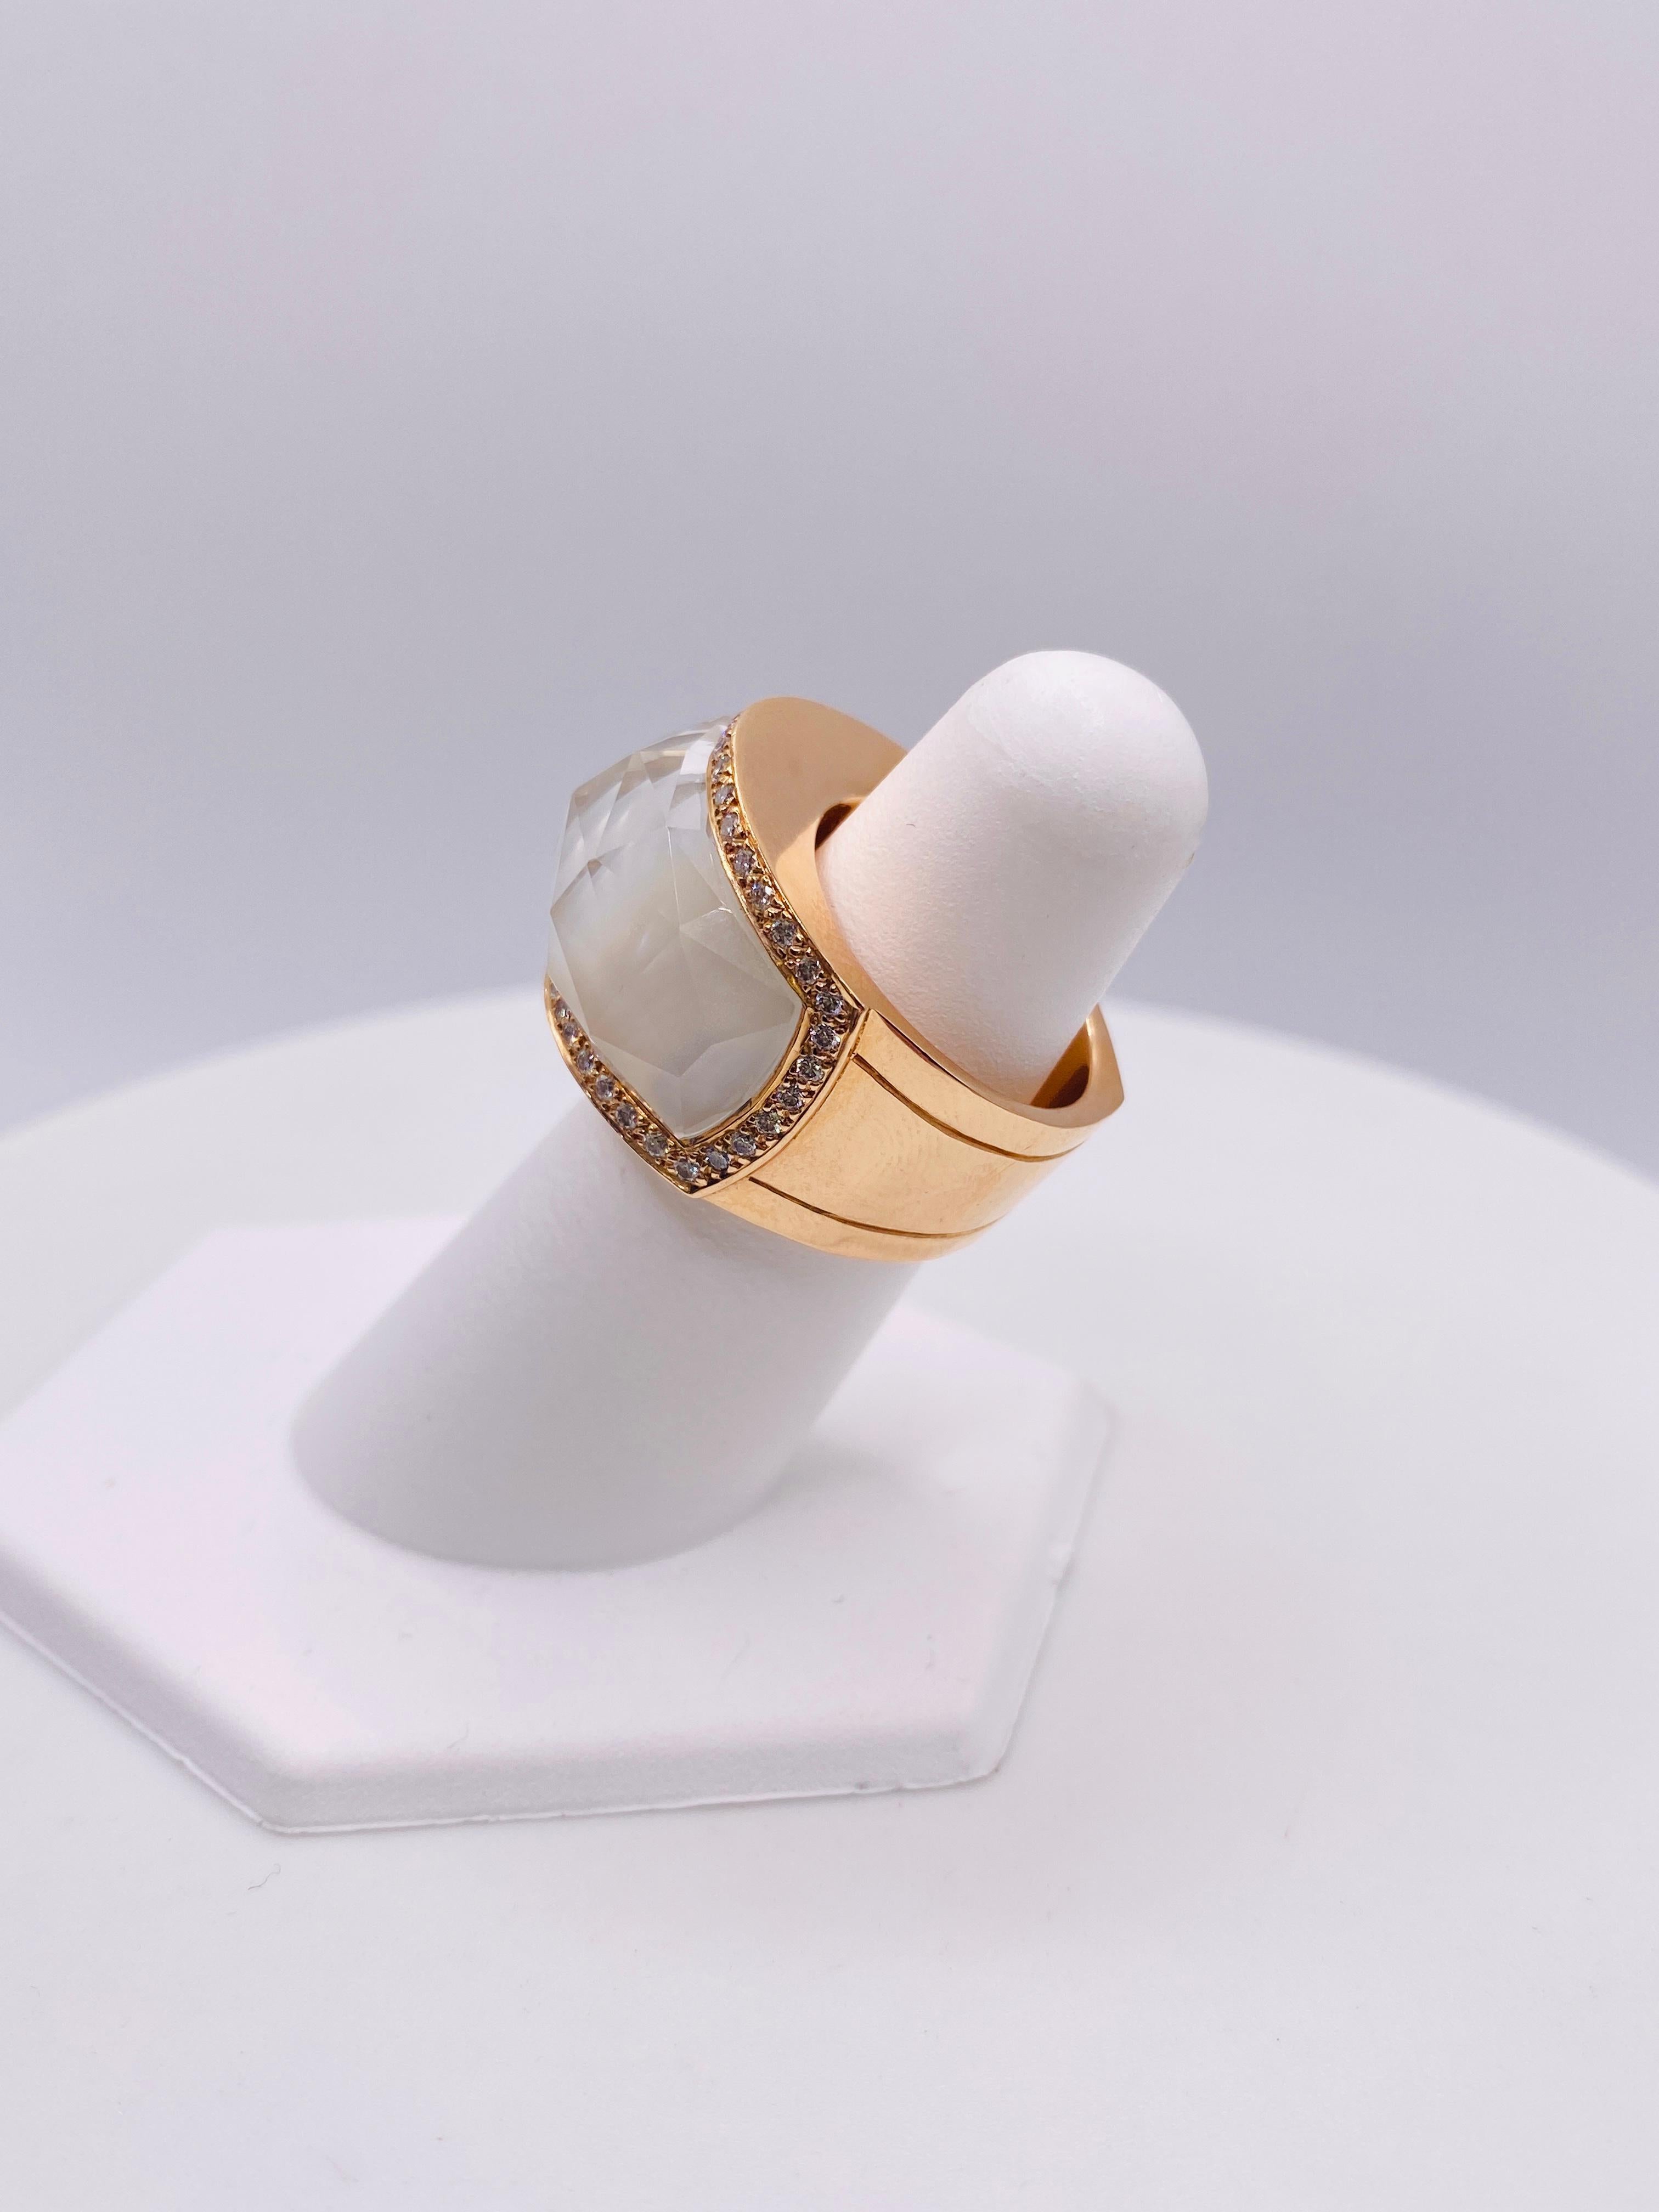 Brilliant Cut Mother of Pearl and Diamond Ring For Sale